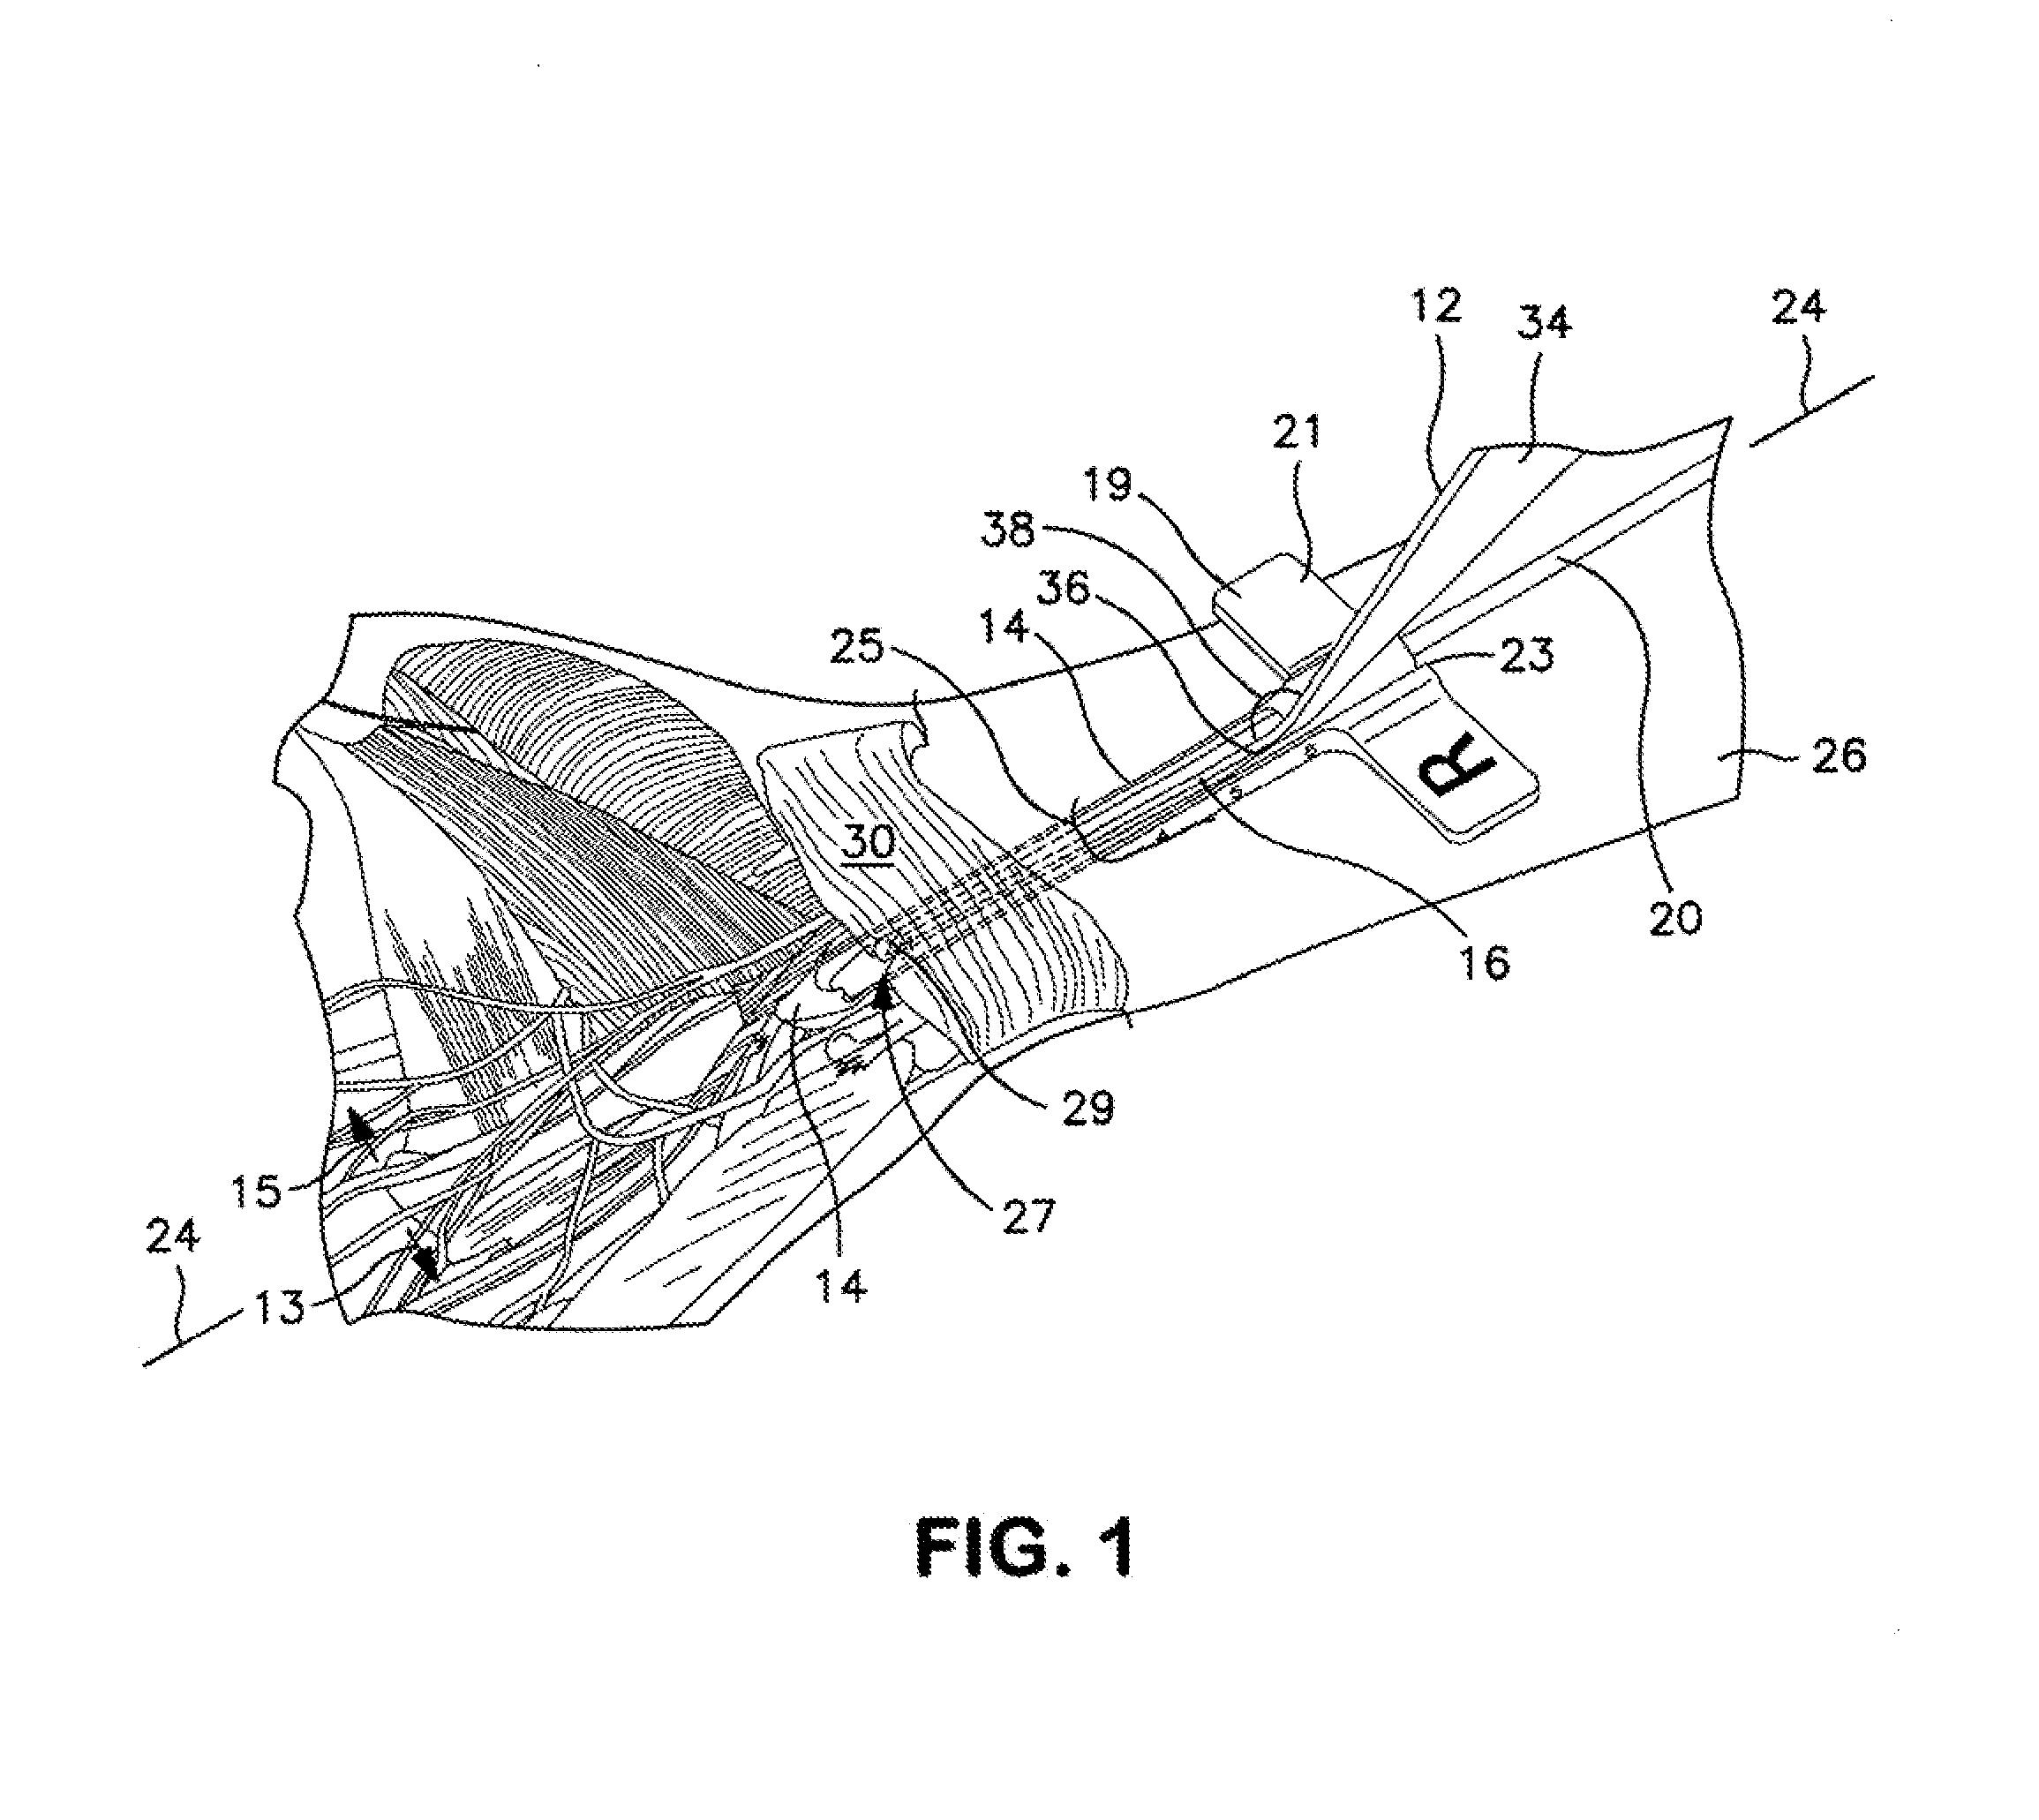 Method and Apparatus for Endoscopic Ligament Release